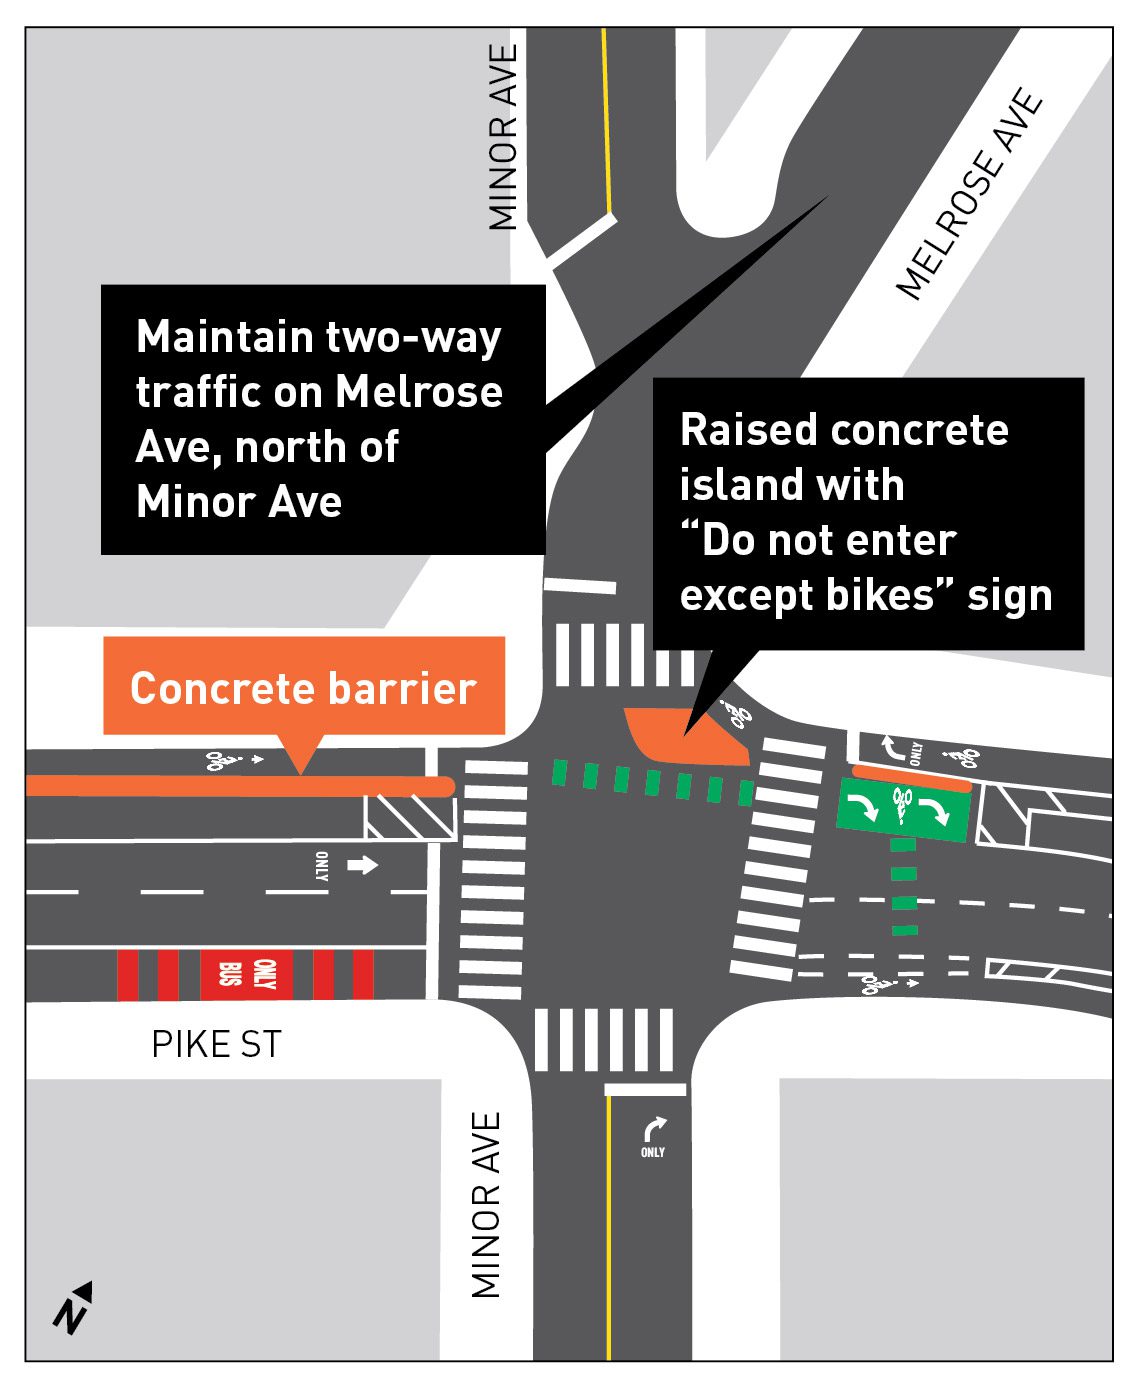 Detailed infographic showing planned street changes at Melrose Ave and E Pike St. An orange bar shows a concrete barrier that will be installed, and other call-out boxes show where changes such as a raised concrete island with do not enter except bikes sign will be located.